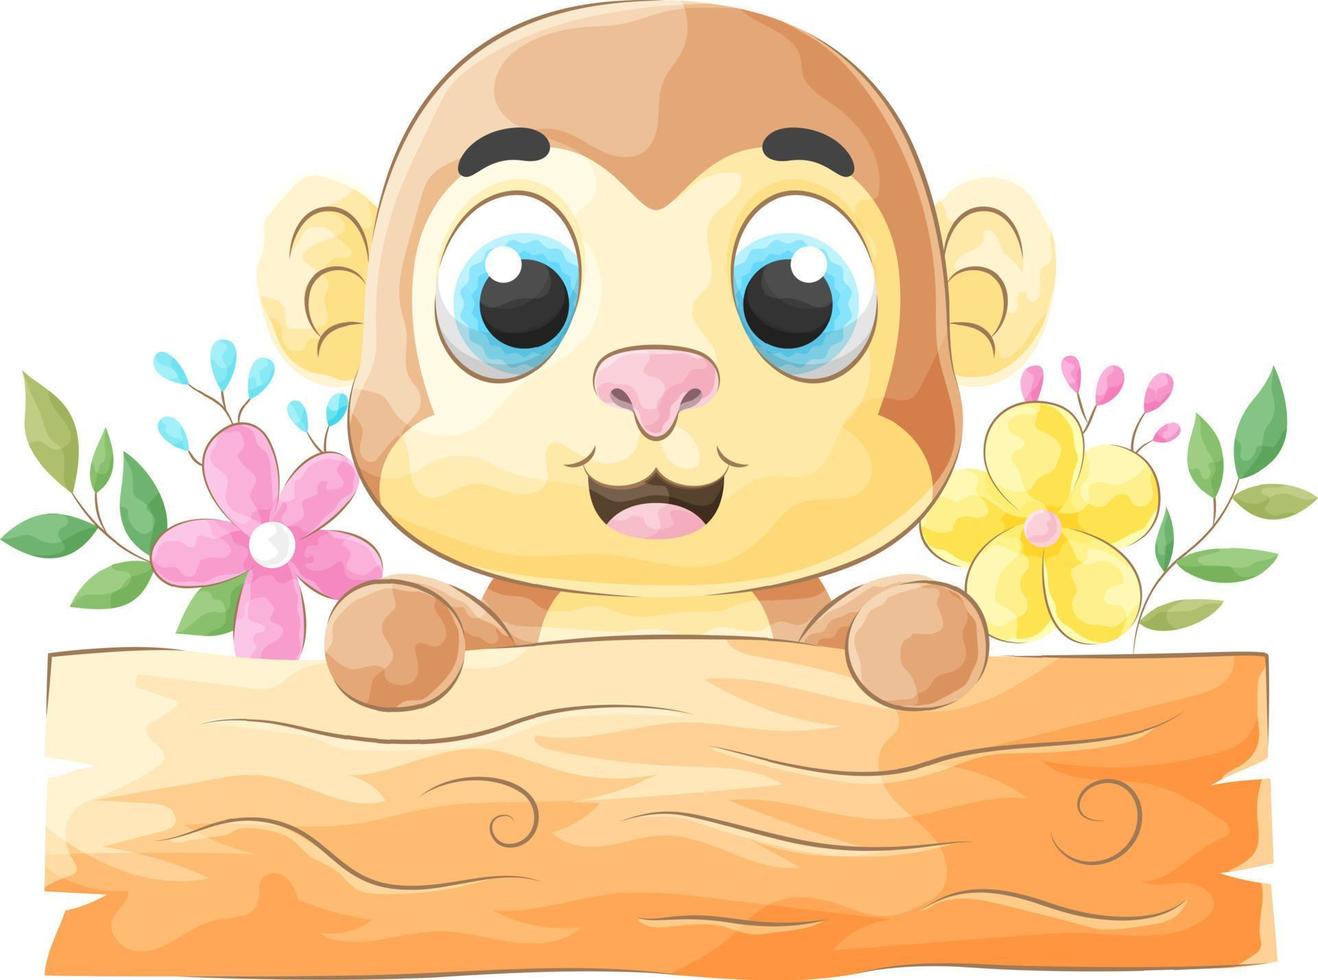 Cute Monkey with Wood Sign Board , watercolor illustration vector